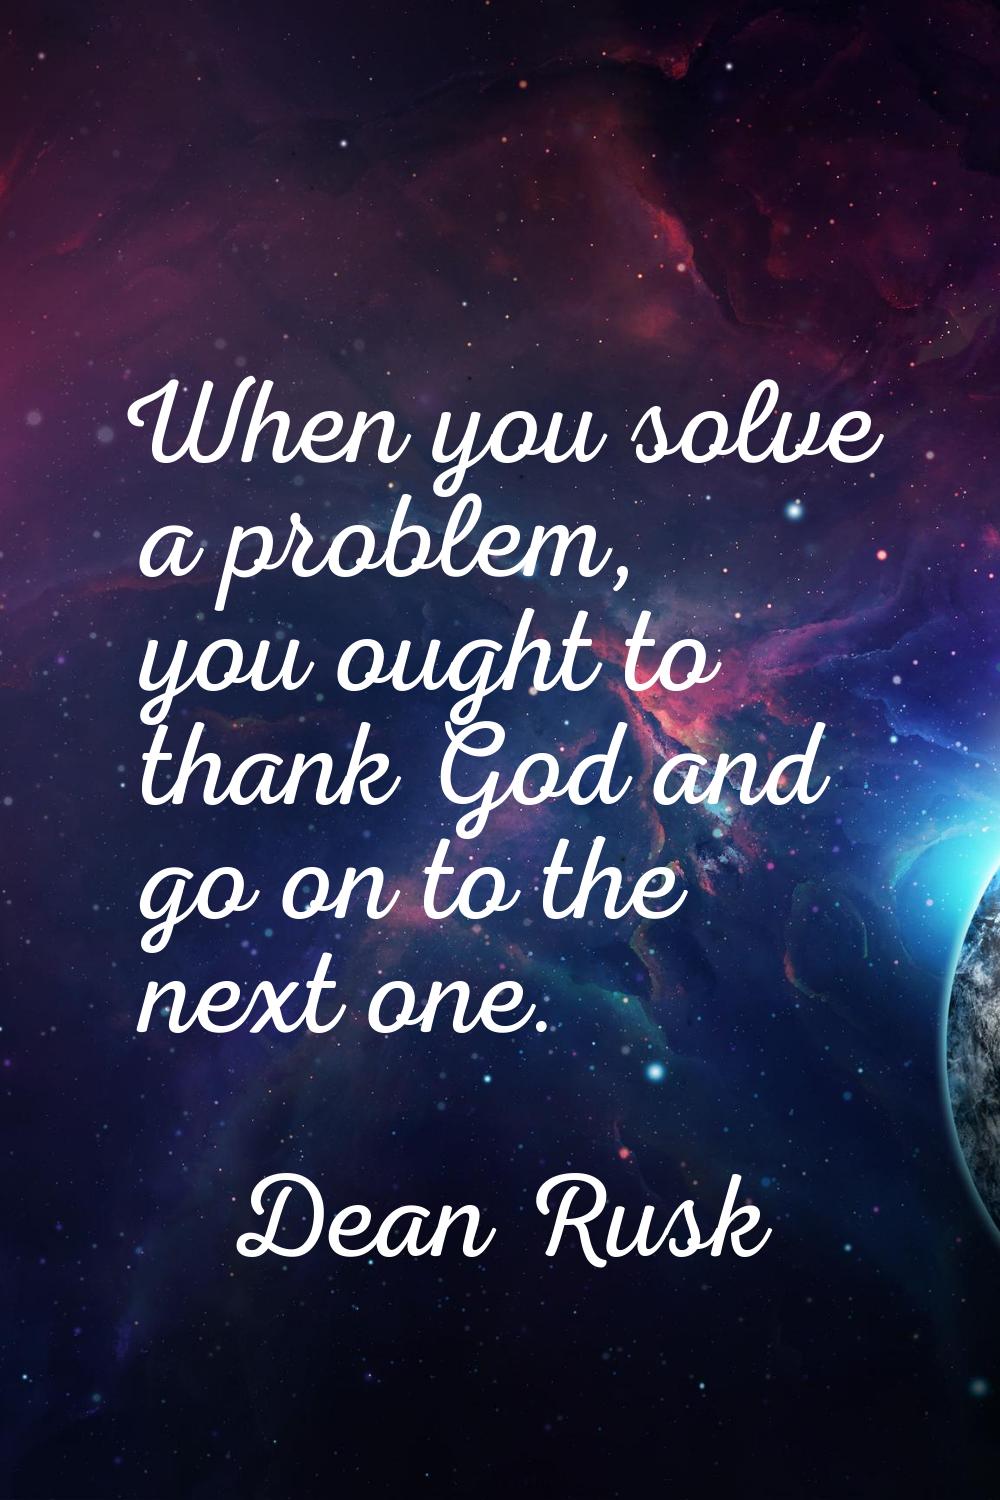 When you solve a problem, you ought to thank God and go on to the next one.